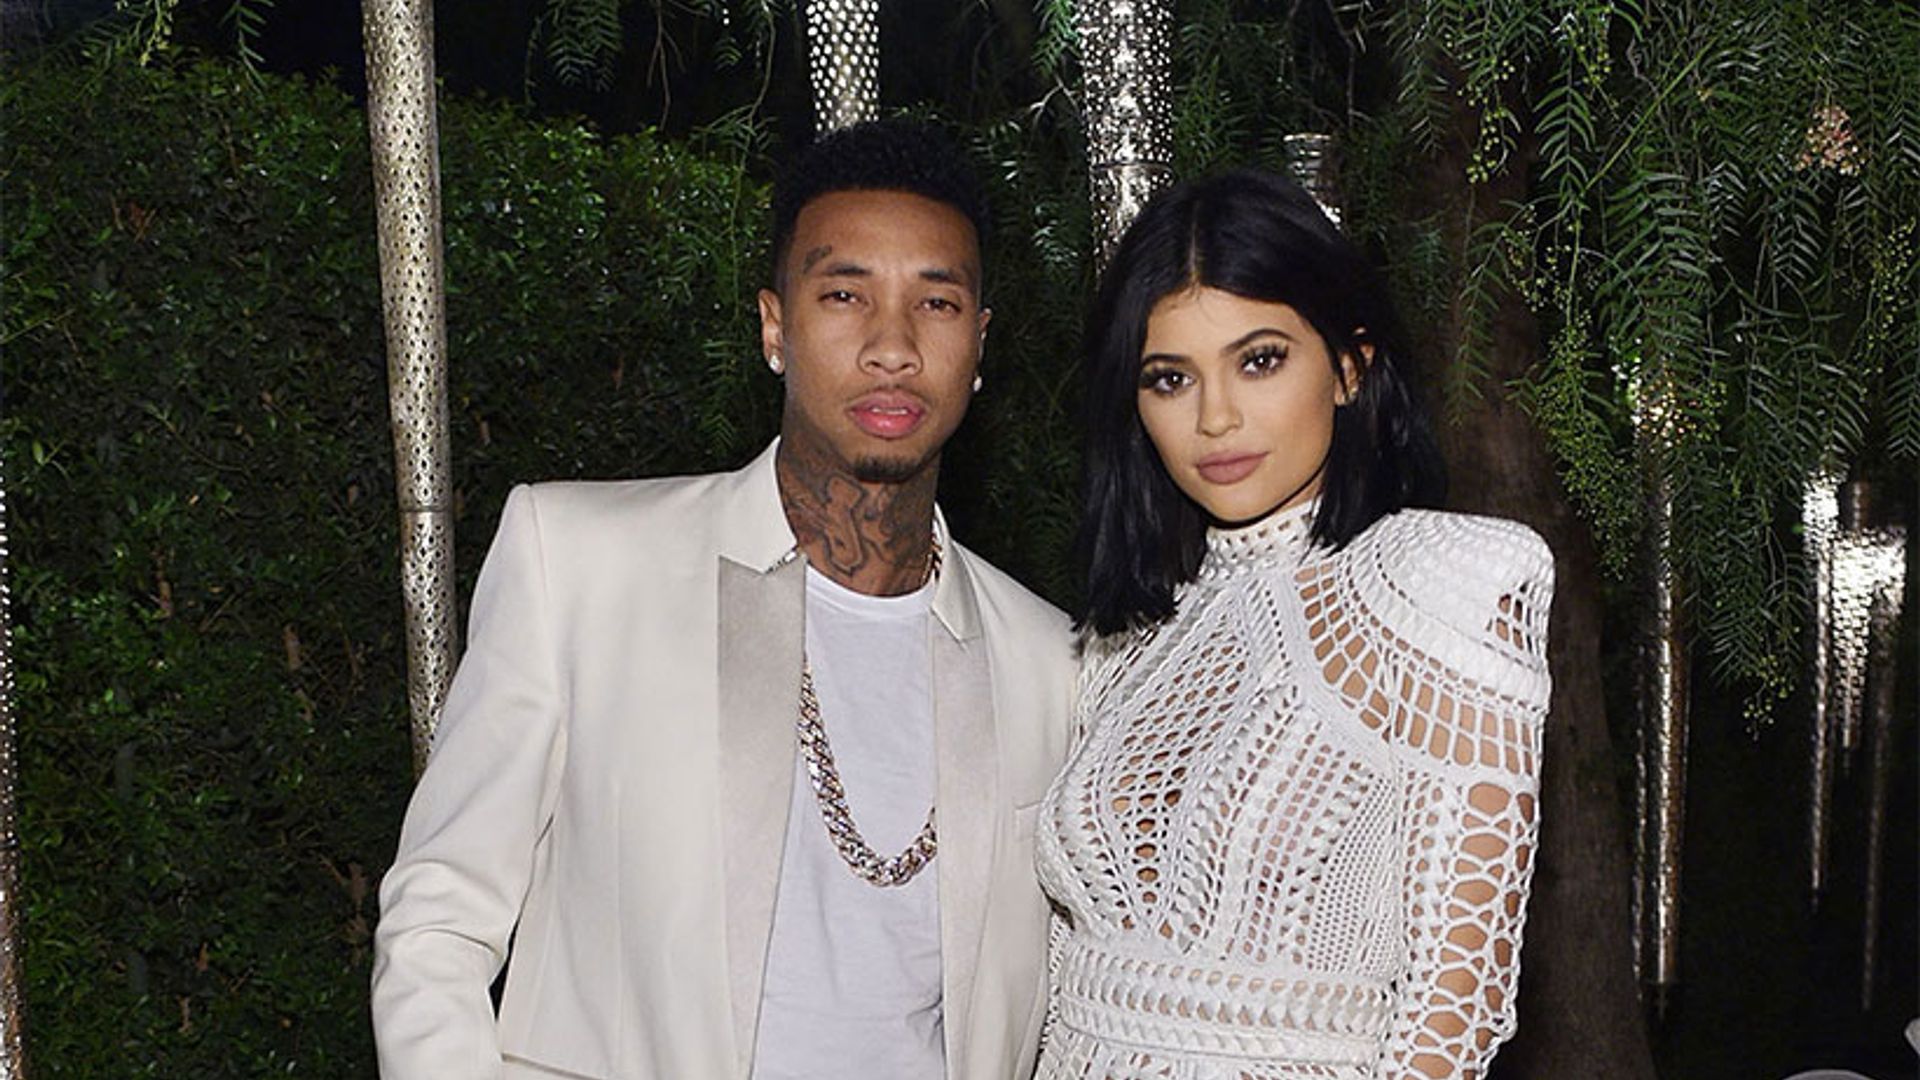 Will Tyga and Kylie Jenner get back together? Rapper hints at possible future reconciliation